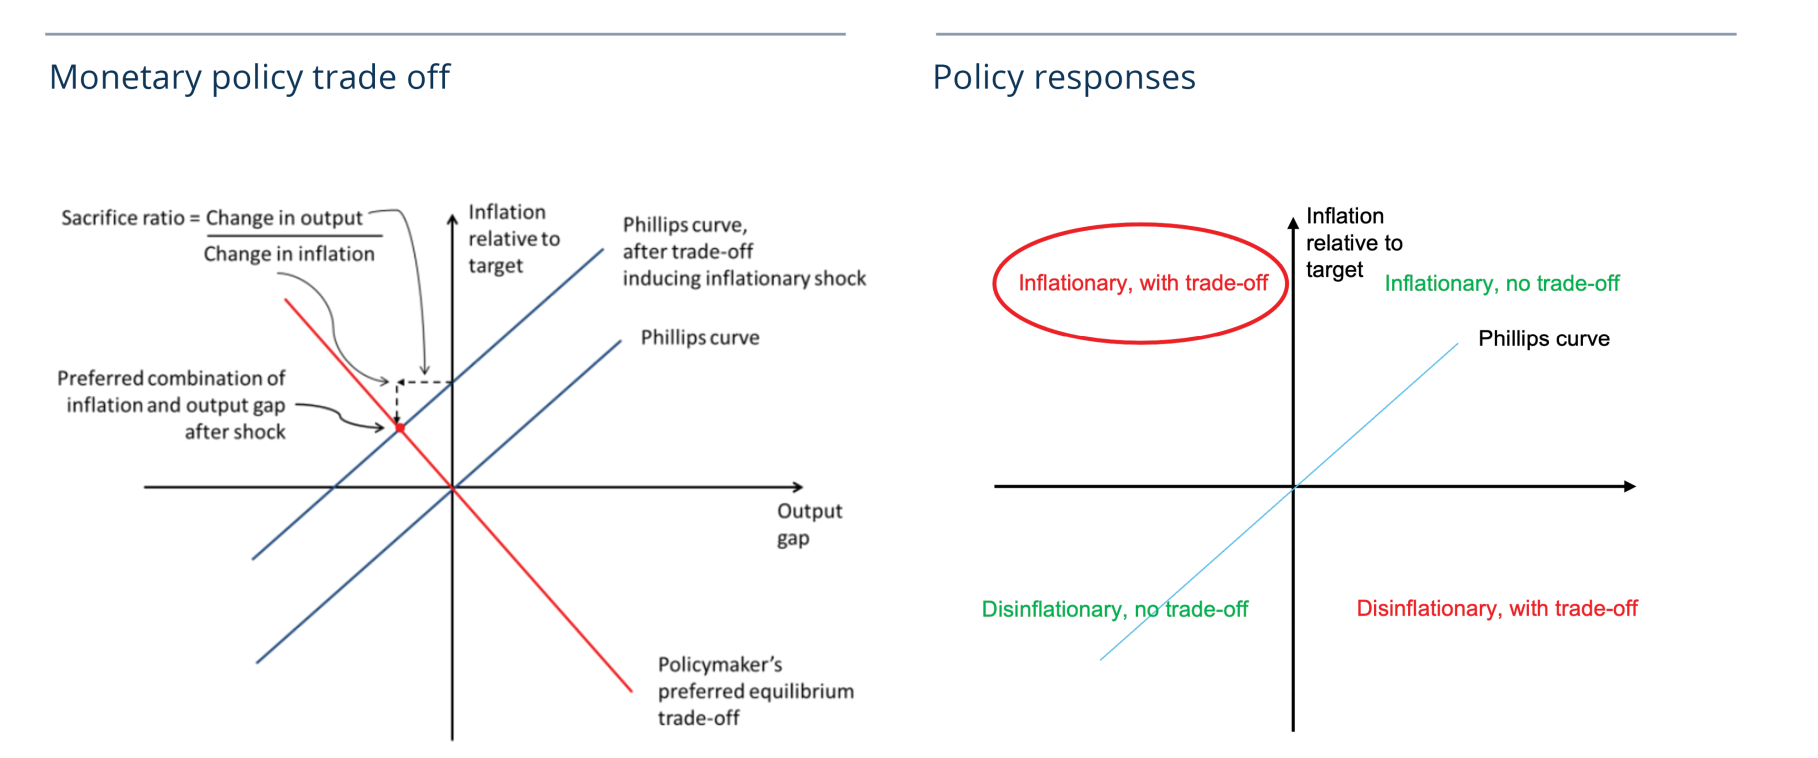 mark-carney-memo_climate-policy-figure-10.png